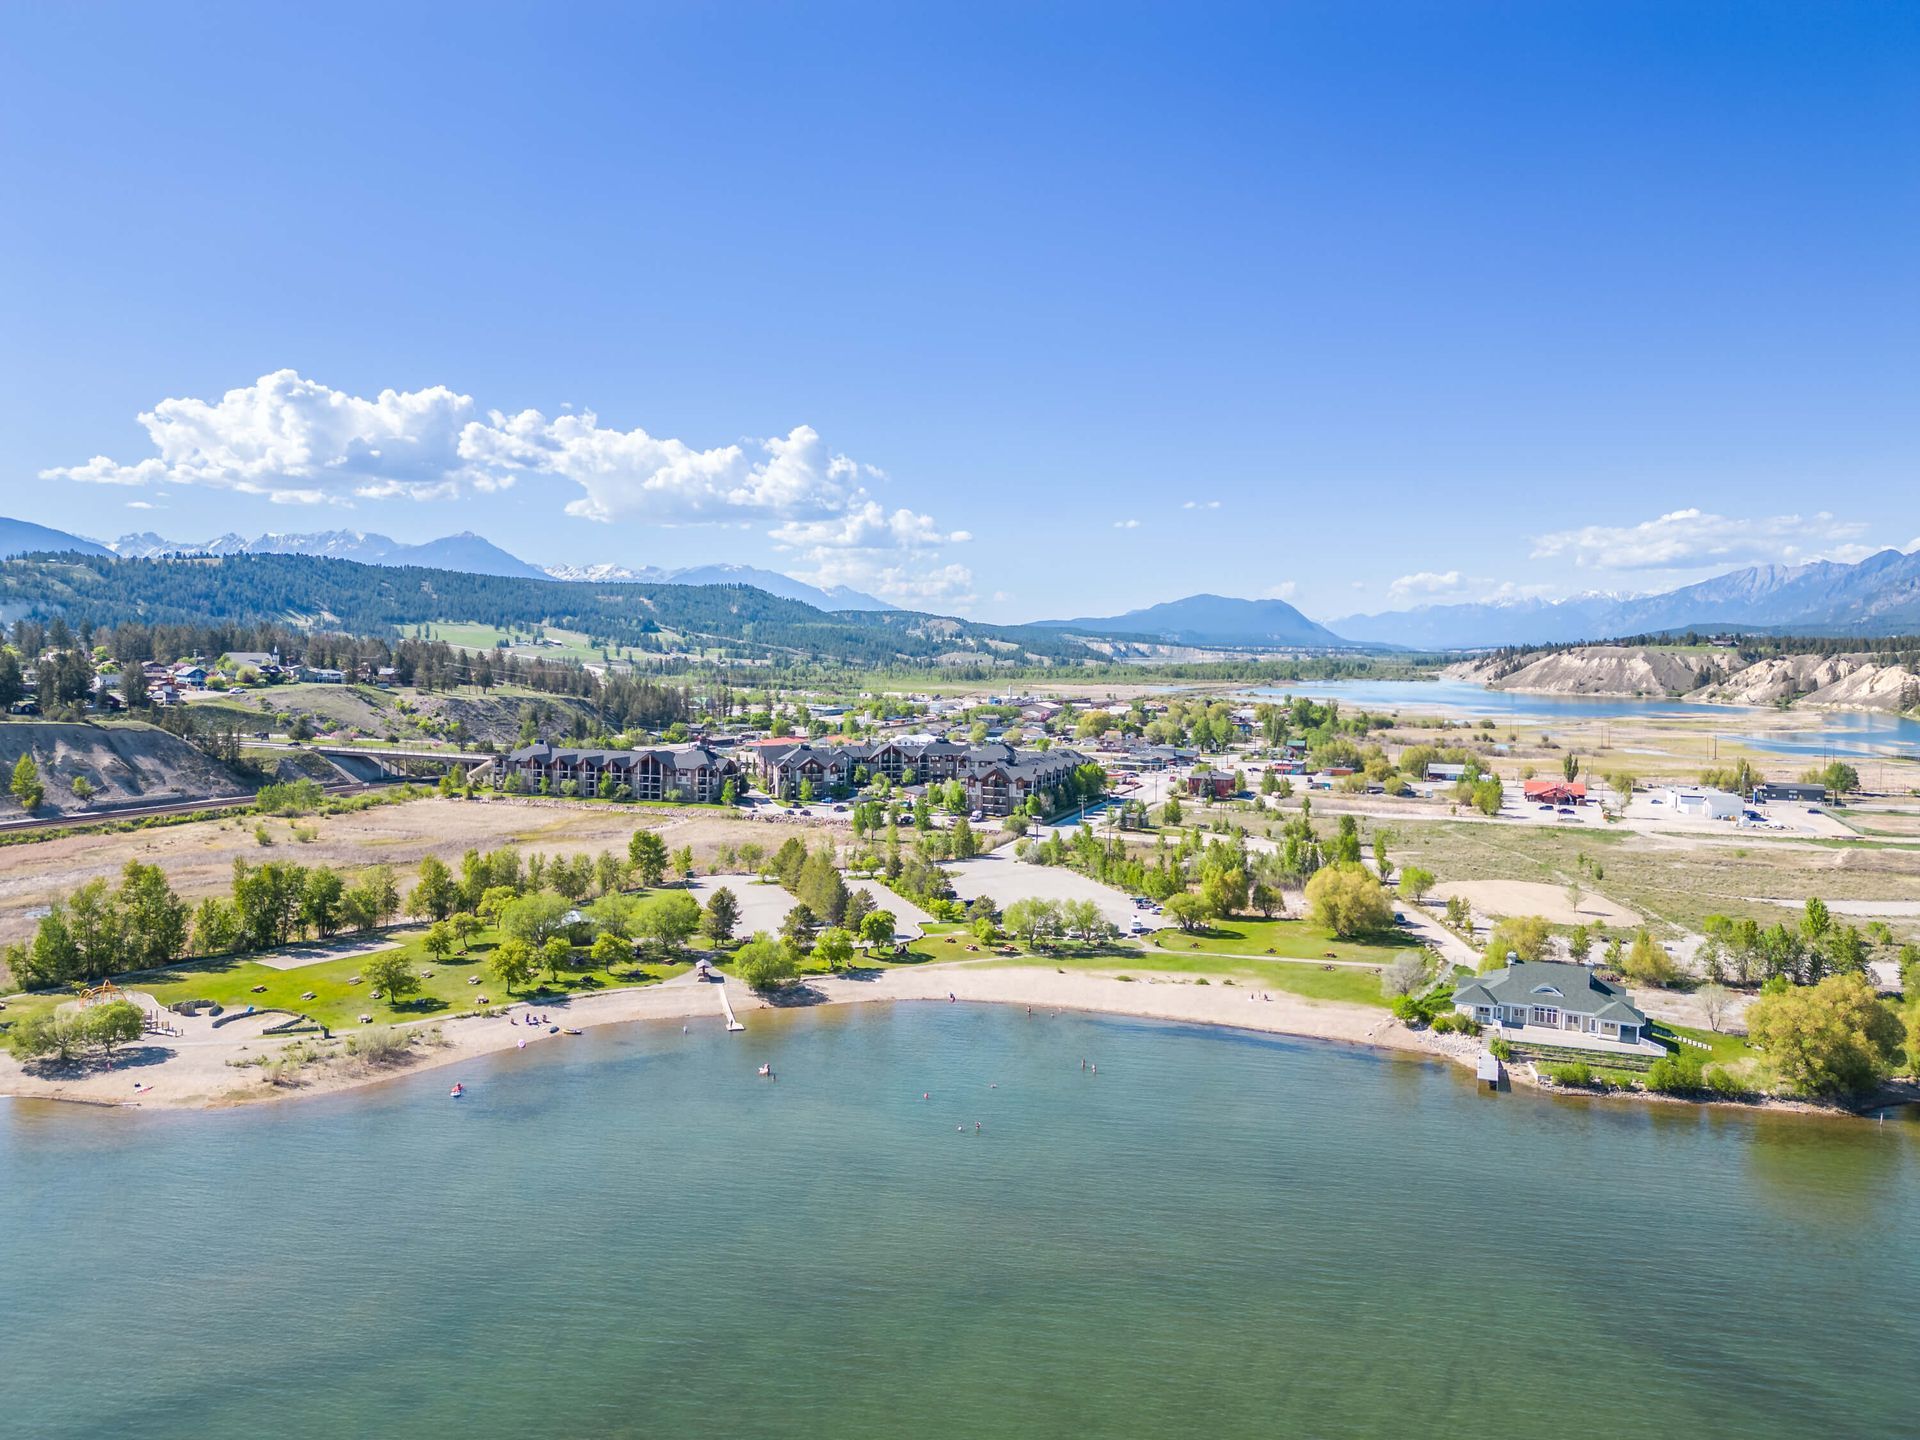 James Chabot Beach walkable distance from the Stylish condo of Lake Windermere Pointe in Invermere, a BC Vacation Rental hosted by Aisling Baile Property Management.